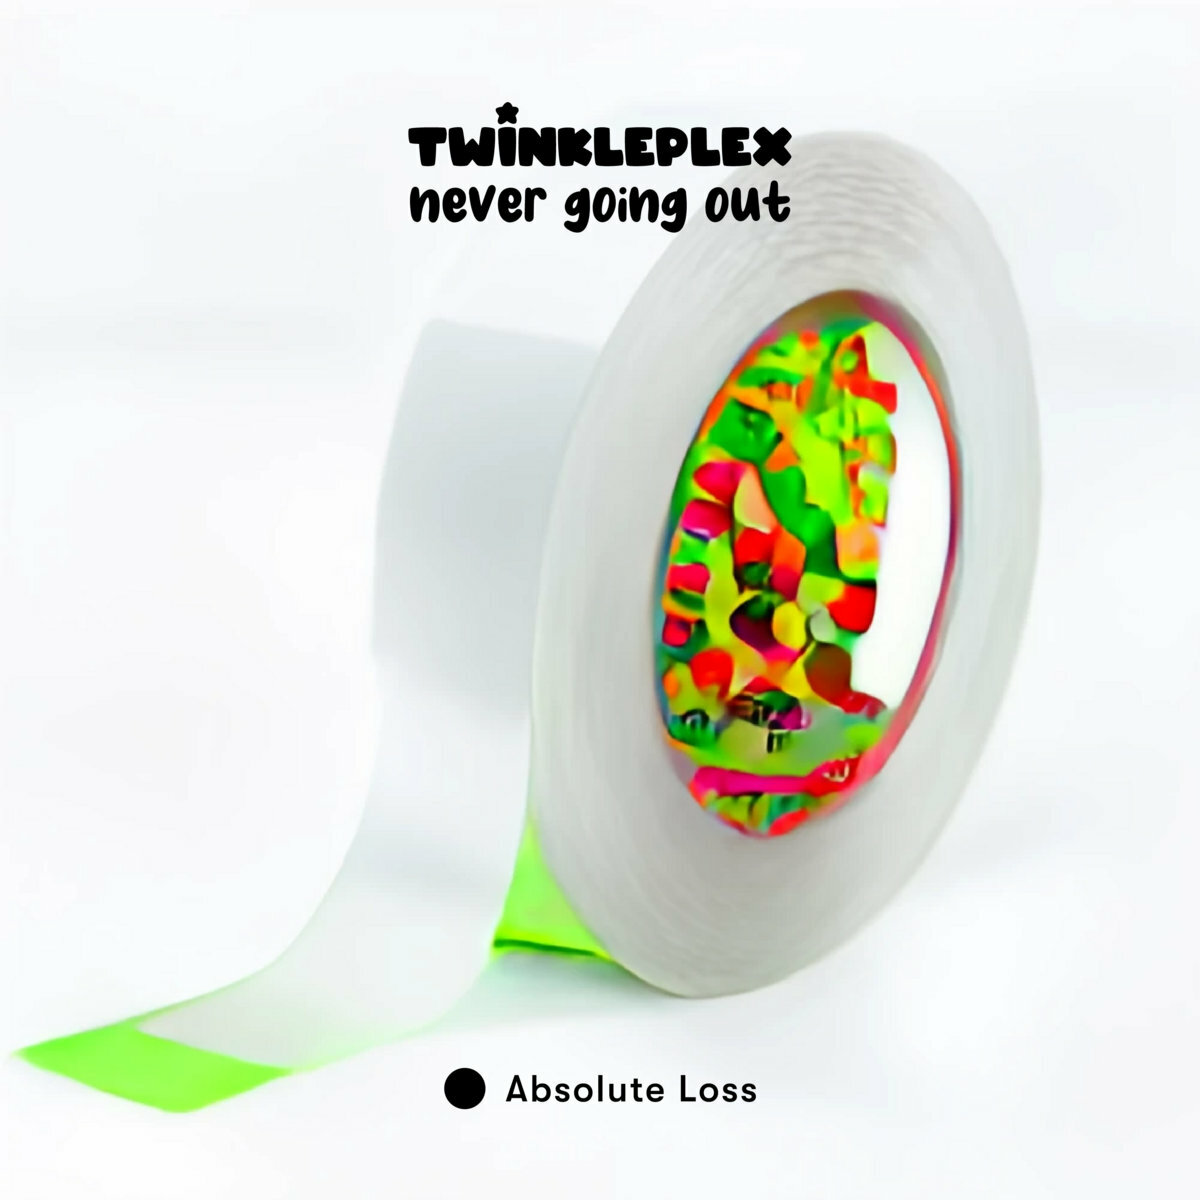 Twinkleplex - Never Going Out